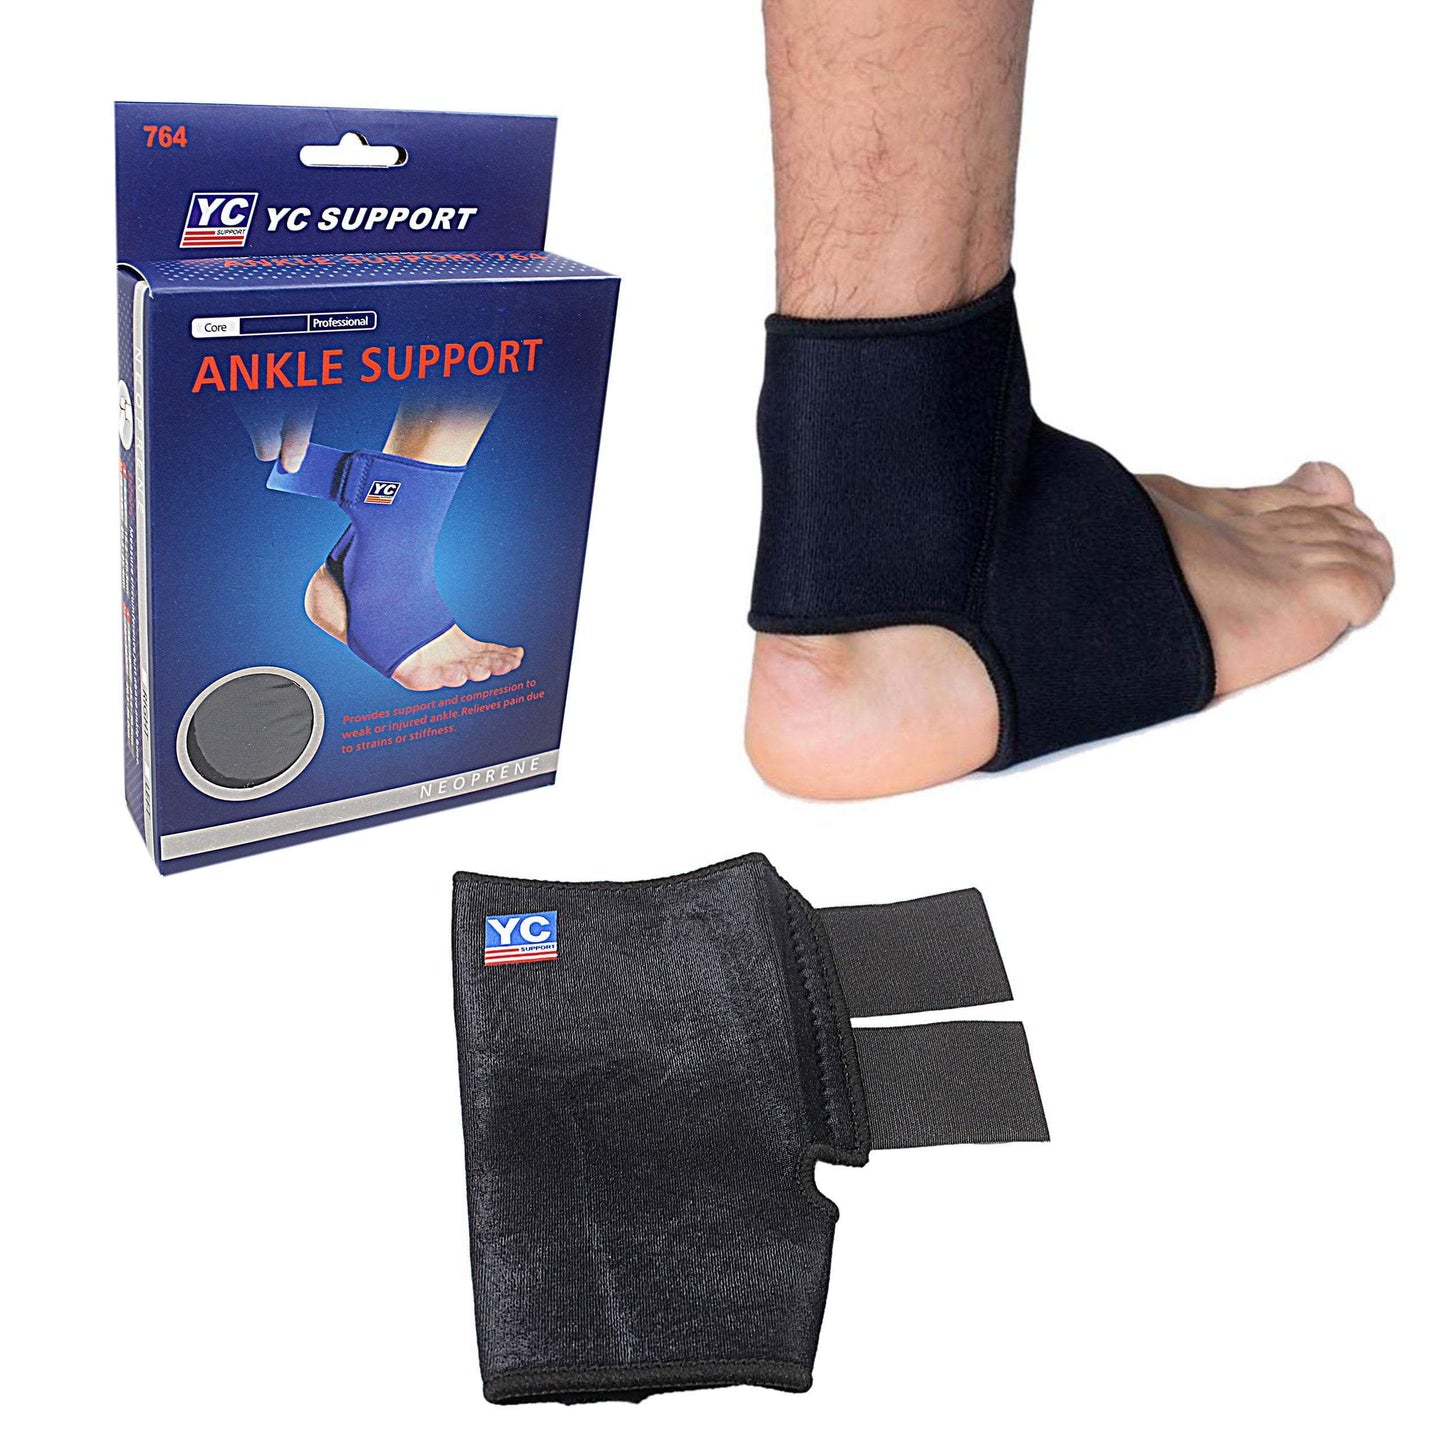 Ankle Support Provides Support And Compression 9992 (Large Letter Rate)